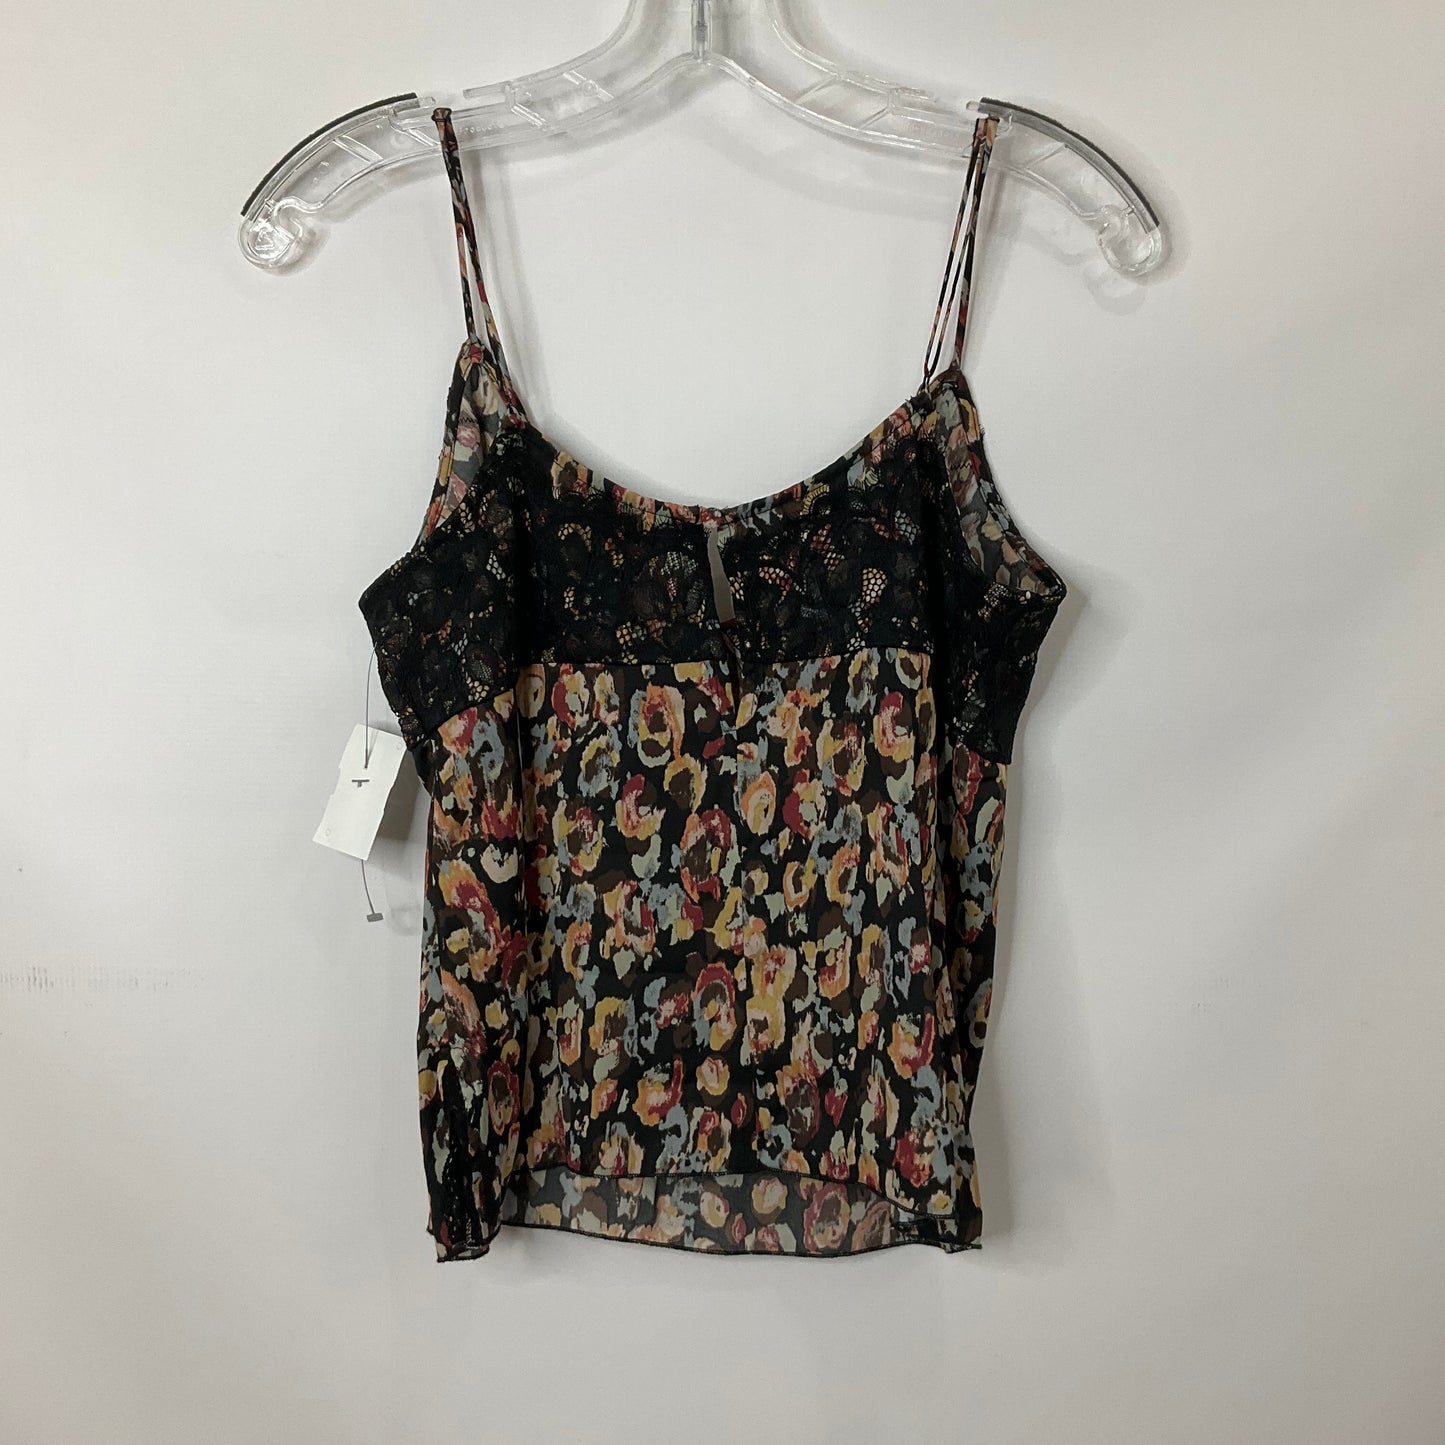 Multi-colored Top Sleeveless Free People, Size S